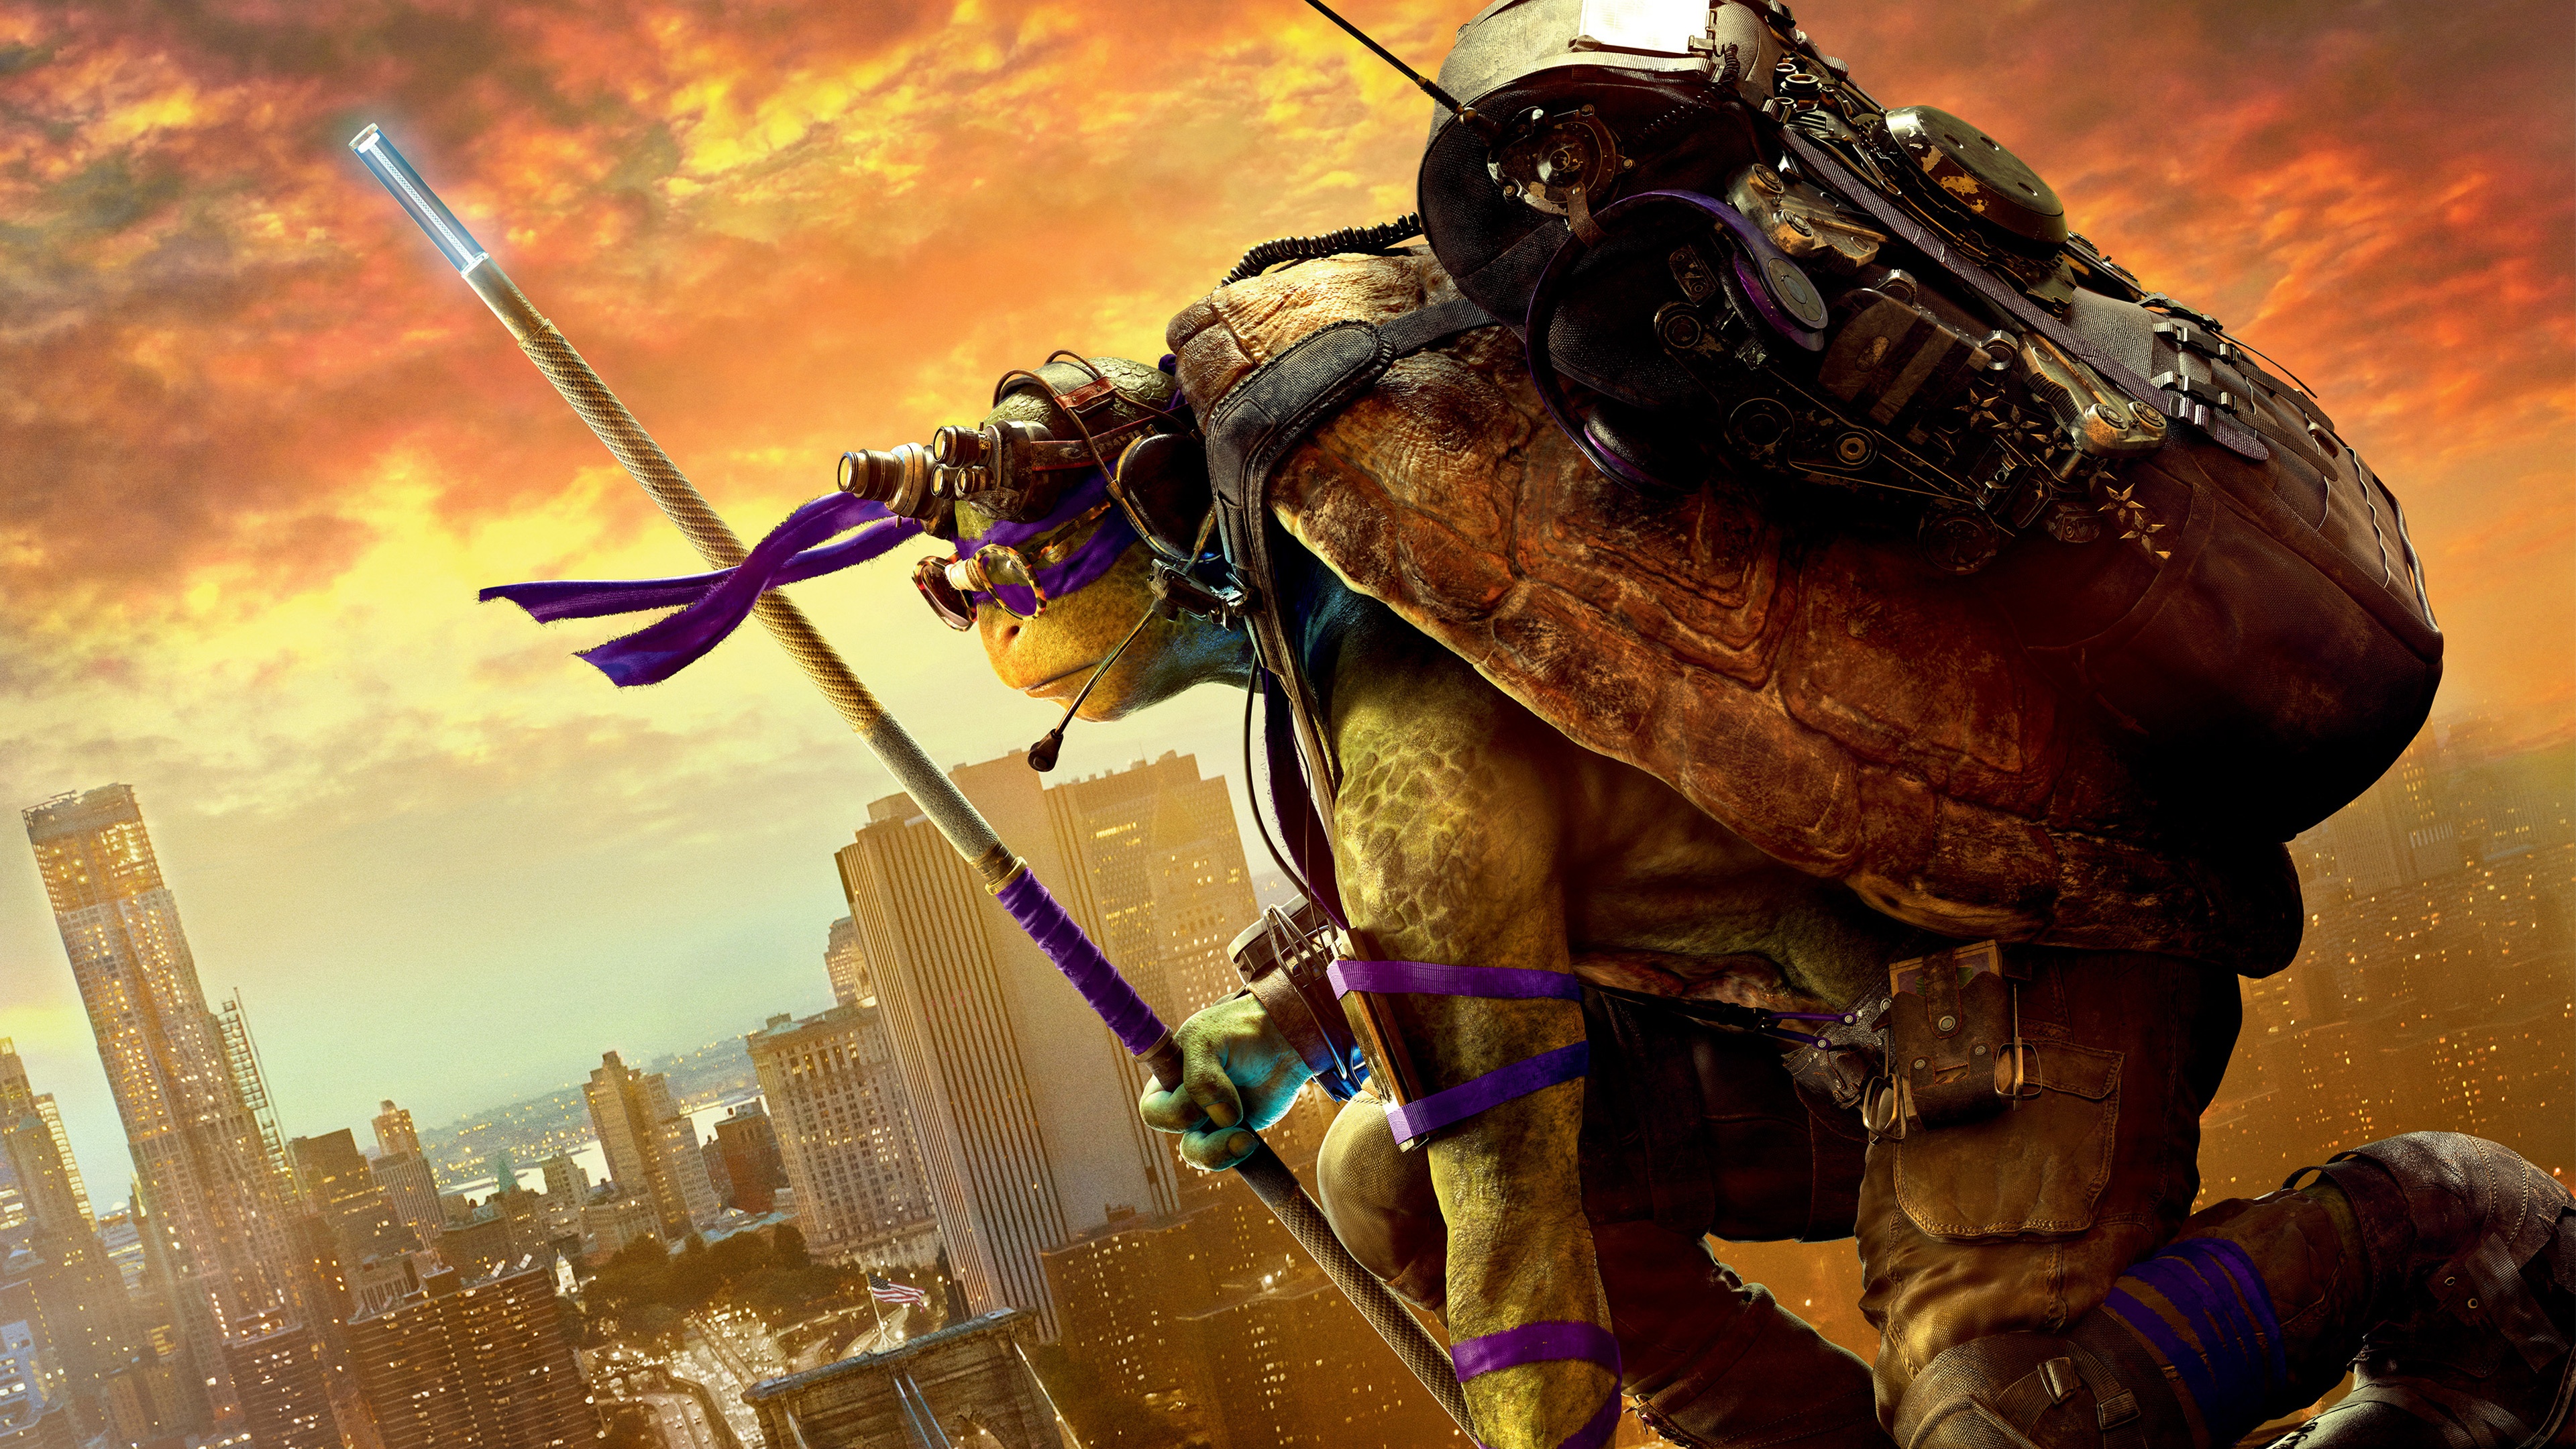 Donatello Teenage Mutant Ninja Turtles Out of the Shadows Wallpaper in jpg format for free download